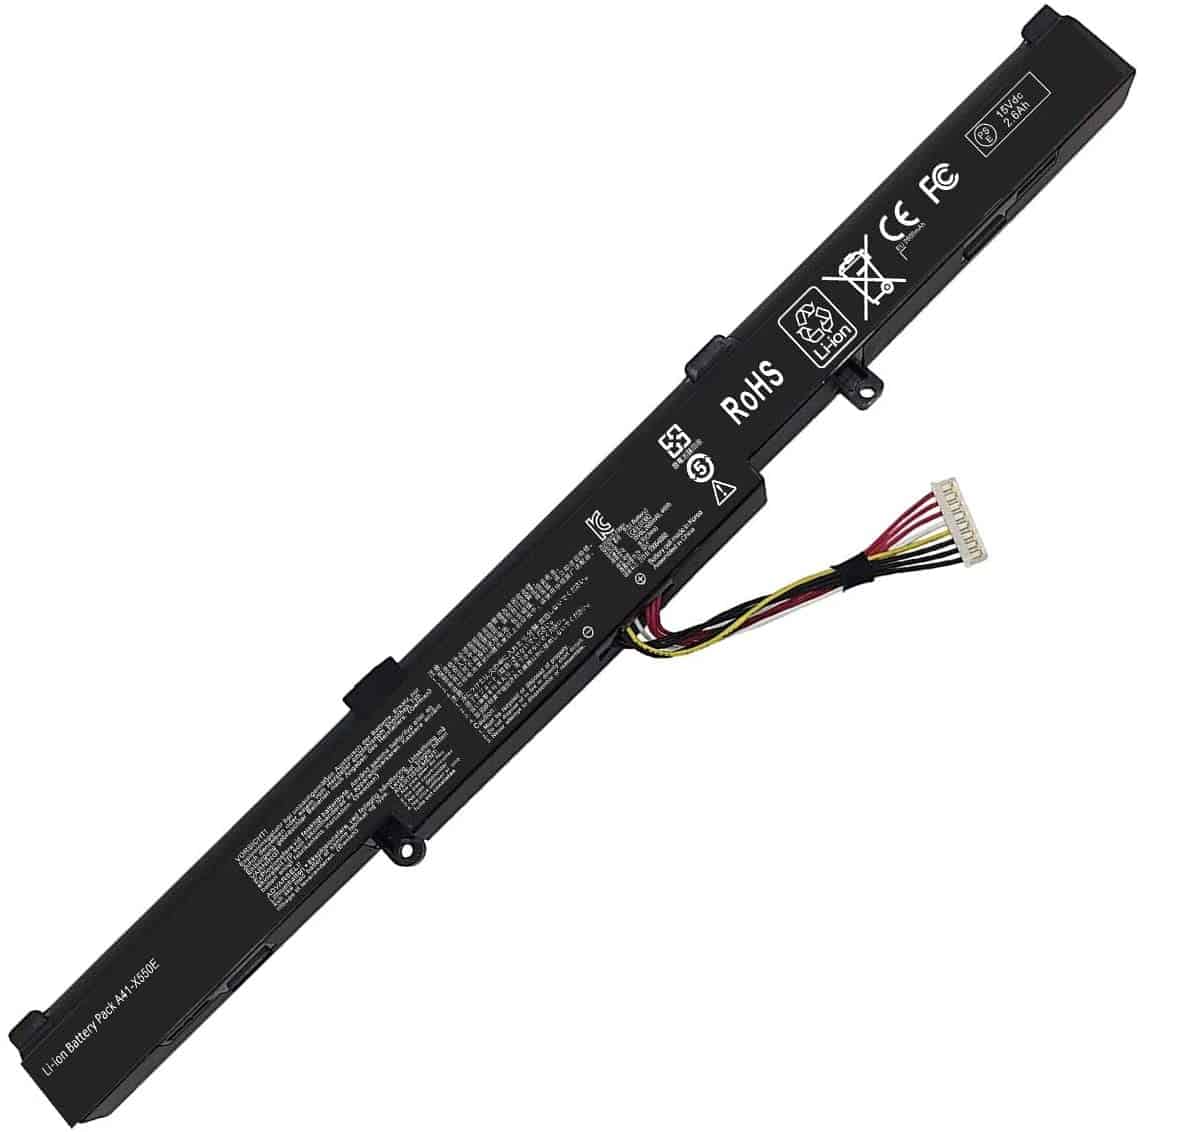 Techie Compatible for ASUS A41-X550E, R751, R752, F751, F550 Laptop Battery.